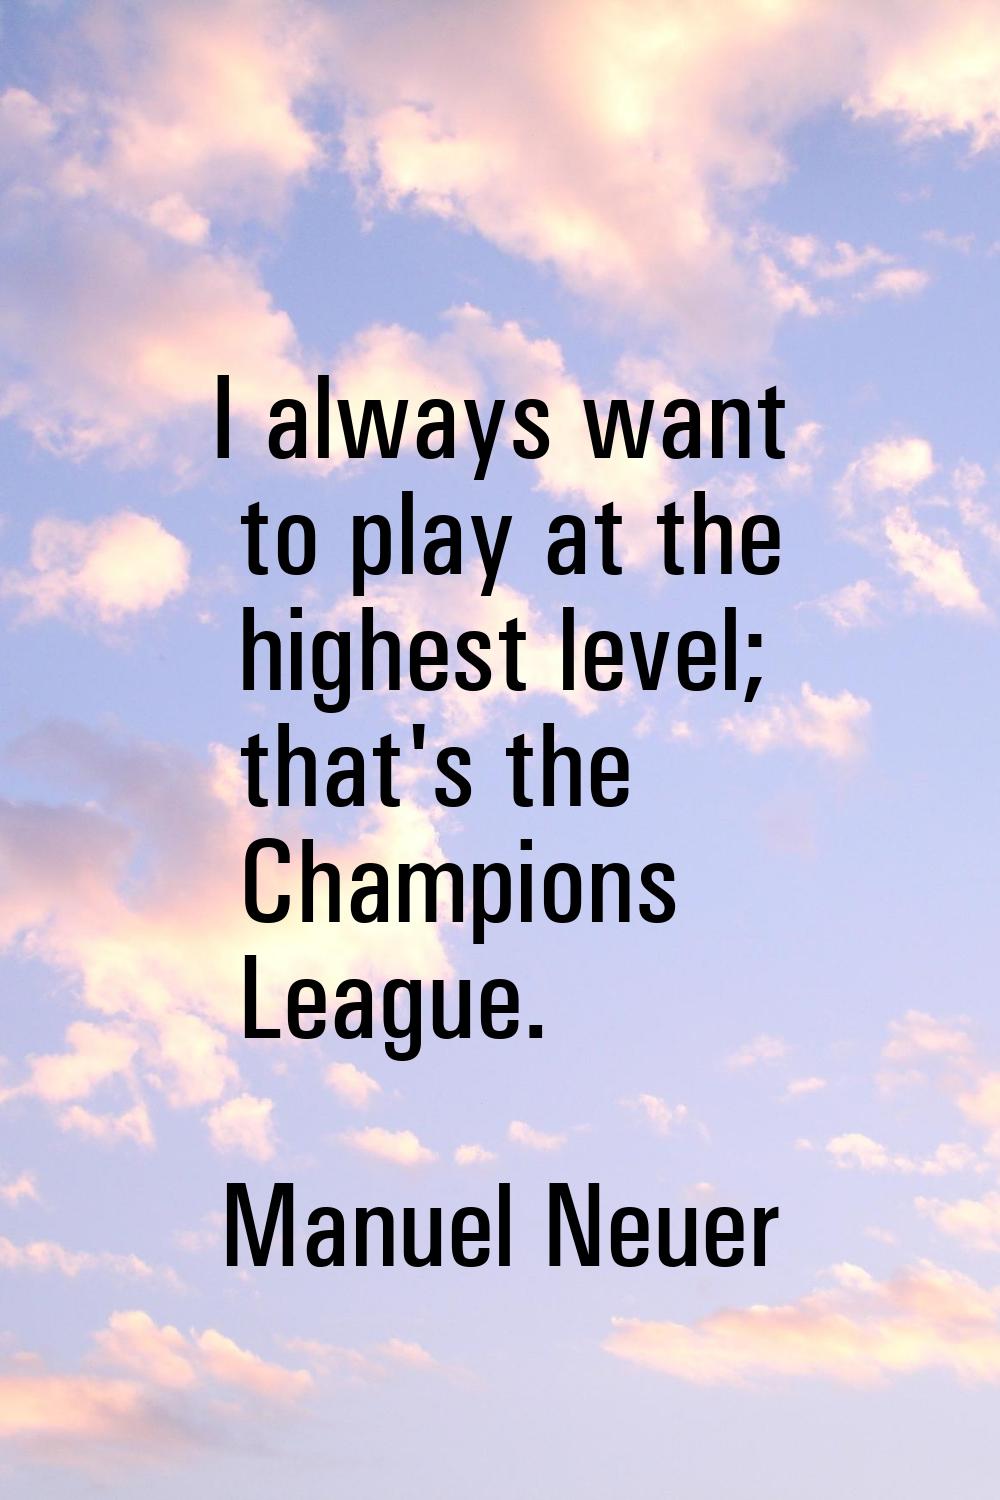 I always want to play at the highest level; that's the Champions League.